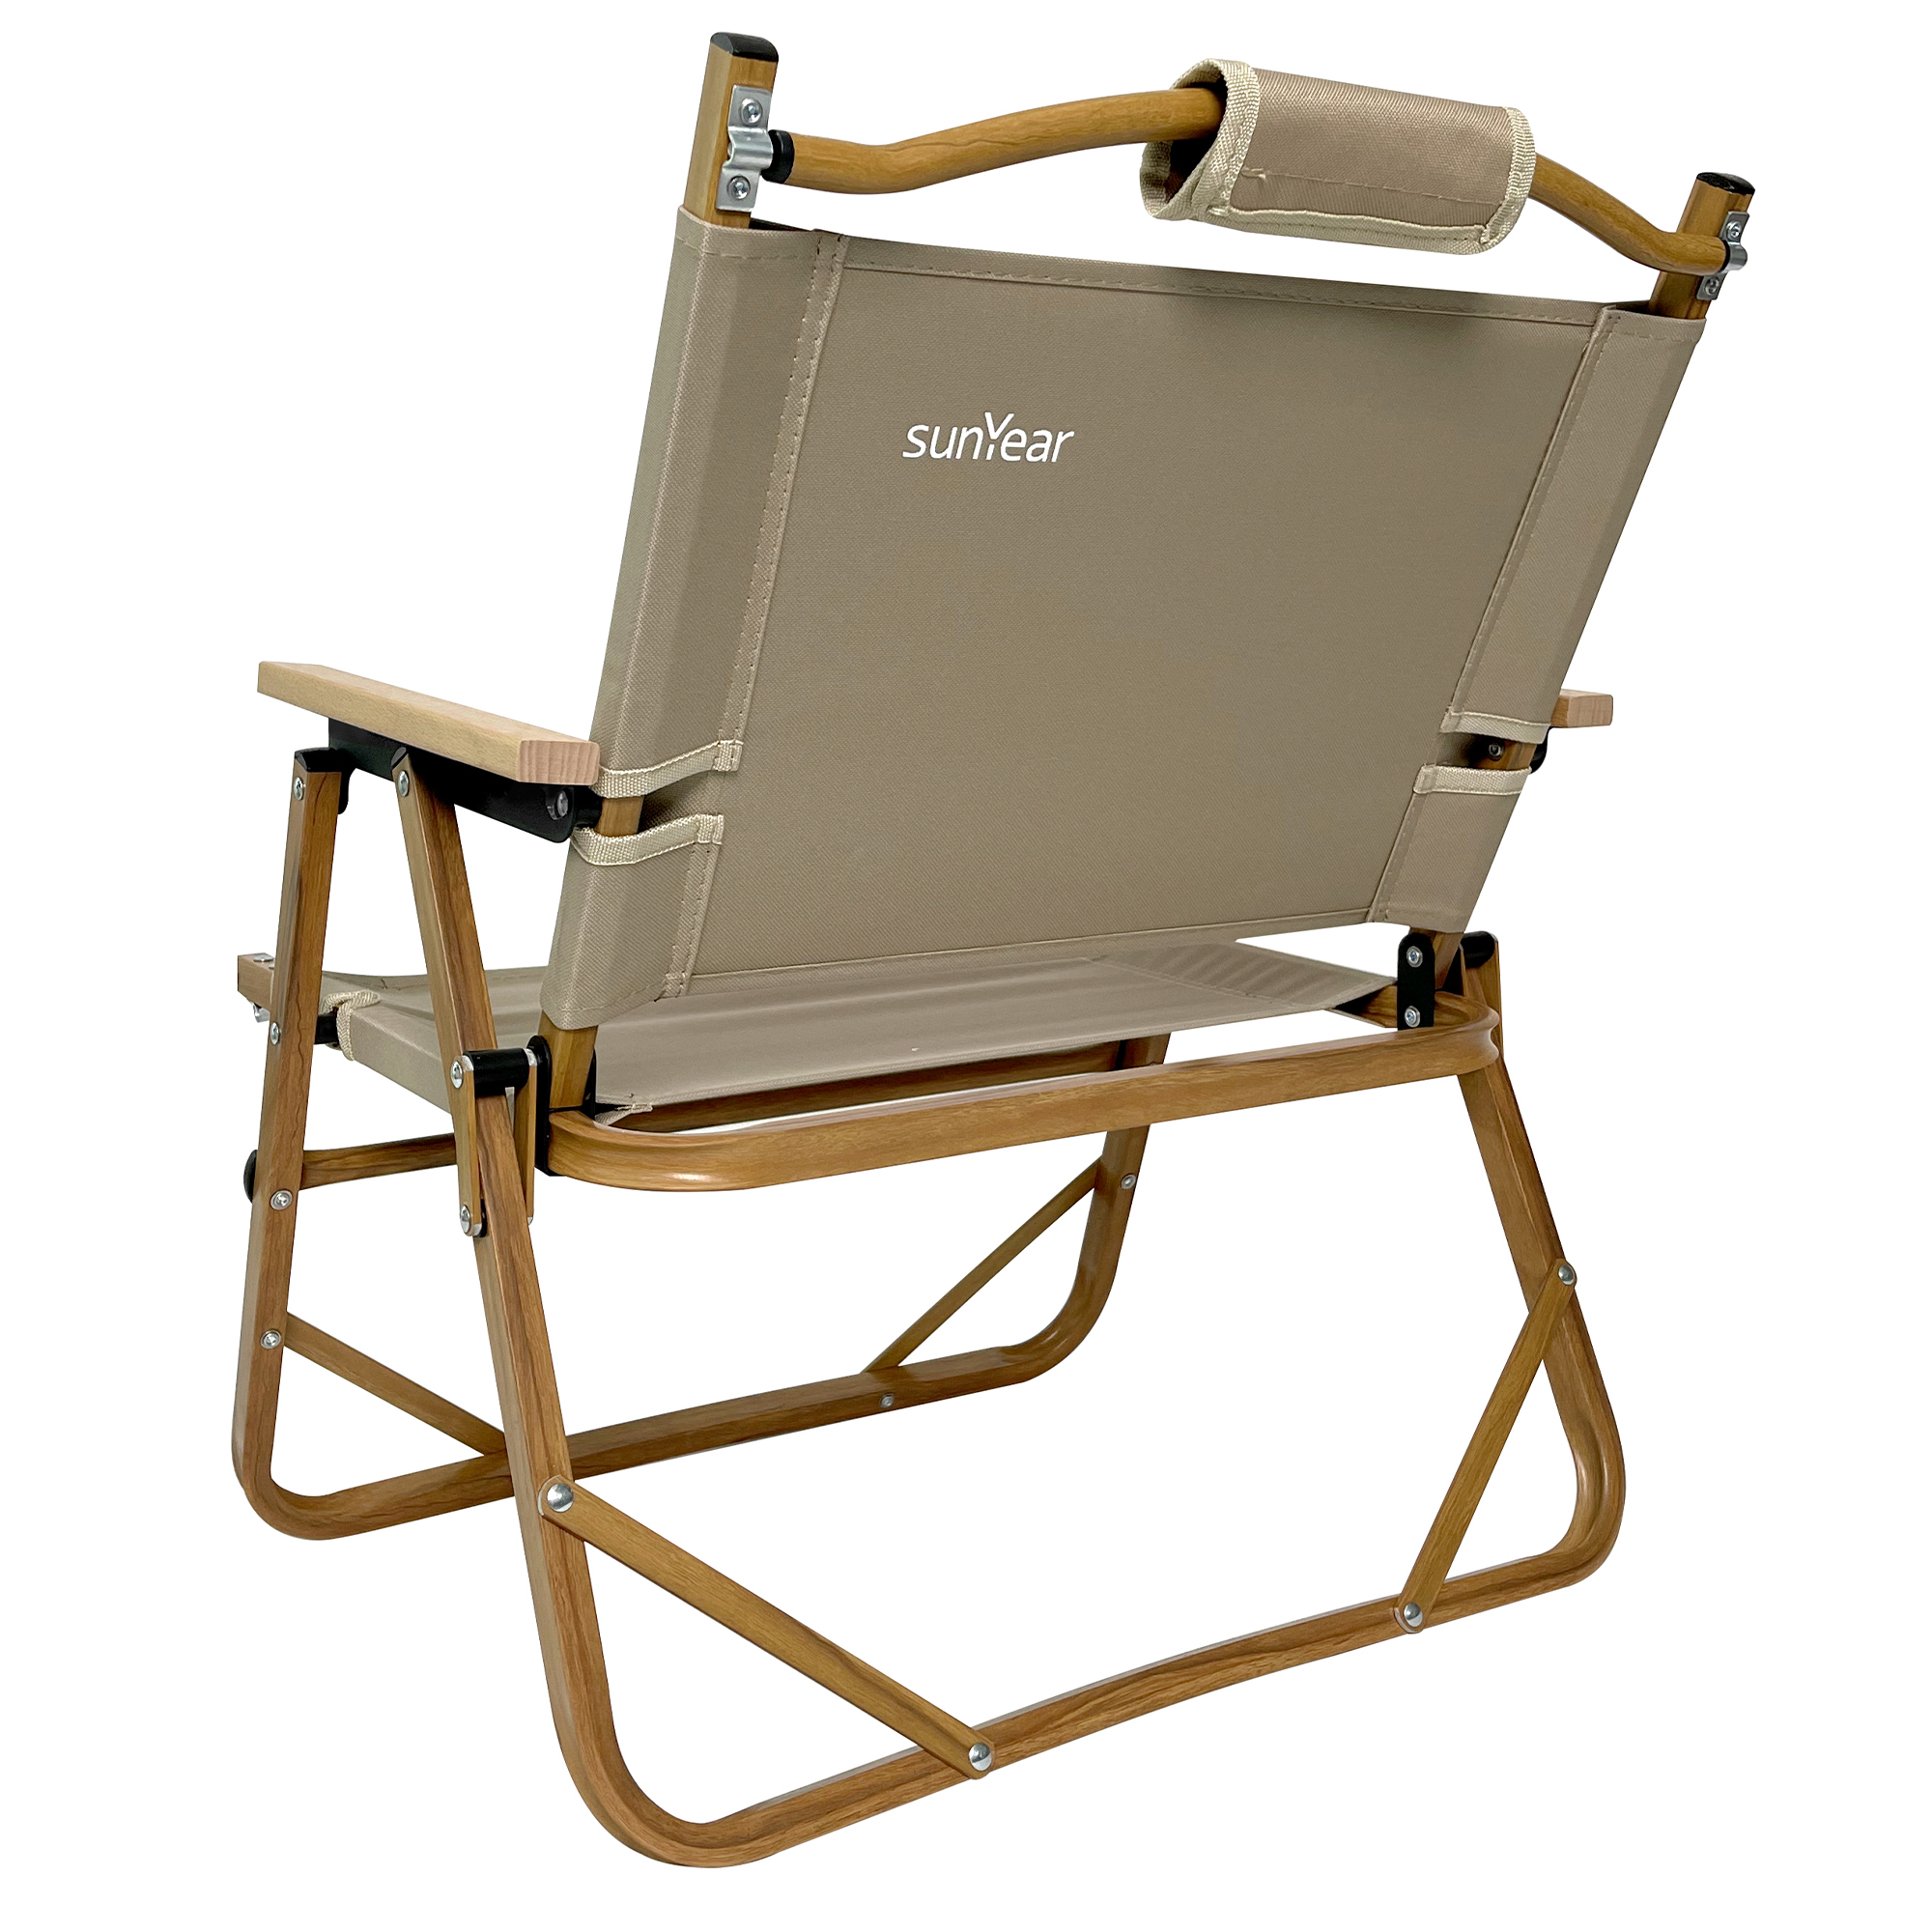 Naturehike MW02 Foldable Chair - Outdoor Furniture Kermit Aluminum Portable Folding Chair Great For Camping Picnic Park